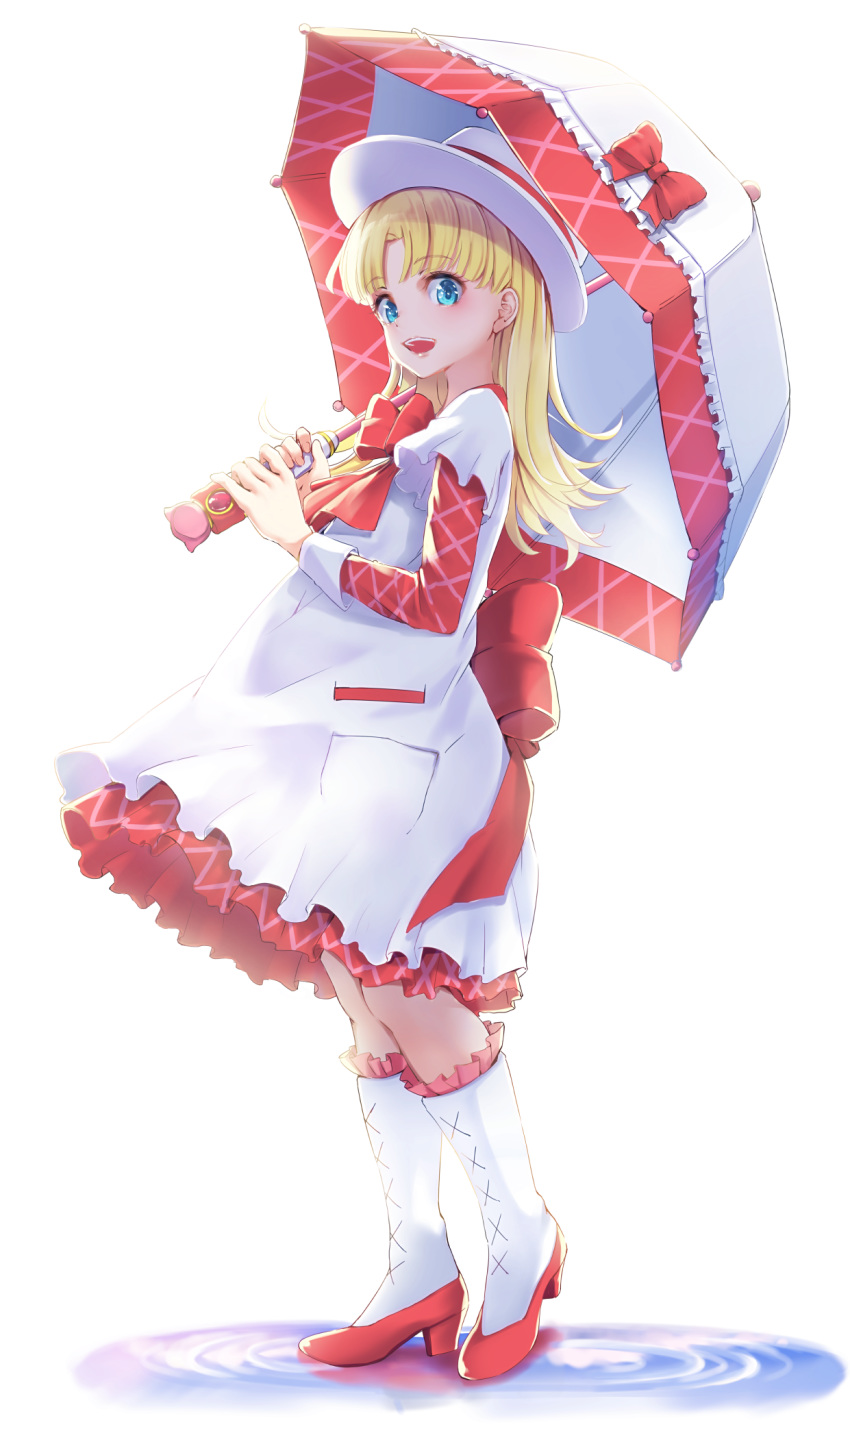 1girl :d ashita_no_nadja bangs blonde_hair blue_eyes blush boots bow commentary_request dress eyebrows_visible_through_hair fingernails frilled_boots frilled_footwear frills funyariko hat high_heel_boots high_heels highres holding holding_umbrella knee_boots long_hair long_sleeves looking_at_viewer nadja_applefield open_mouth parted_bangs puddle red_bow ripples short_over_long_sleeves short_sleeves simple_background smile solo umbrella water white_background white_dress white_footwear white_headwear white_umbrella